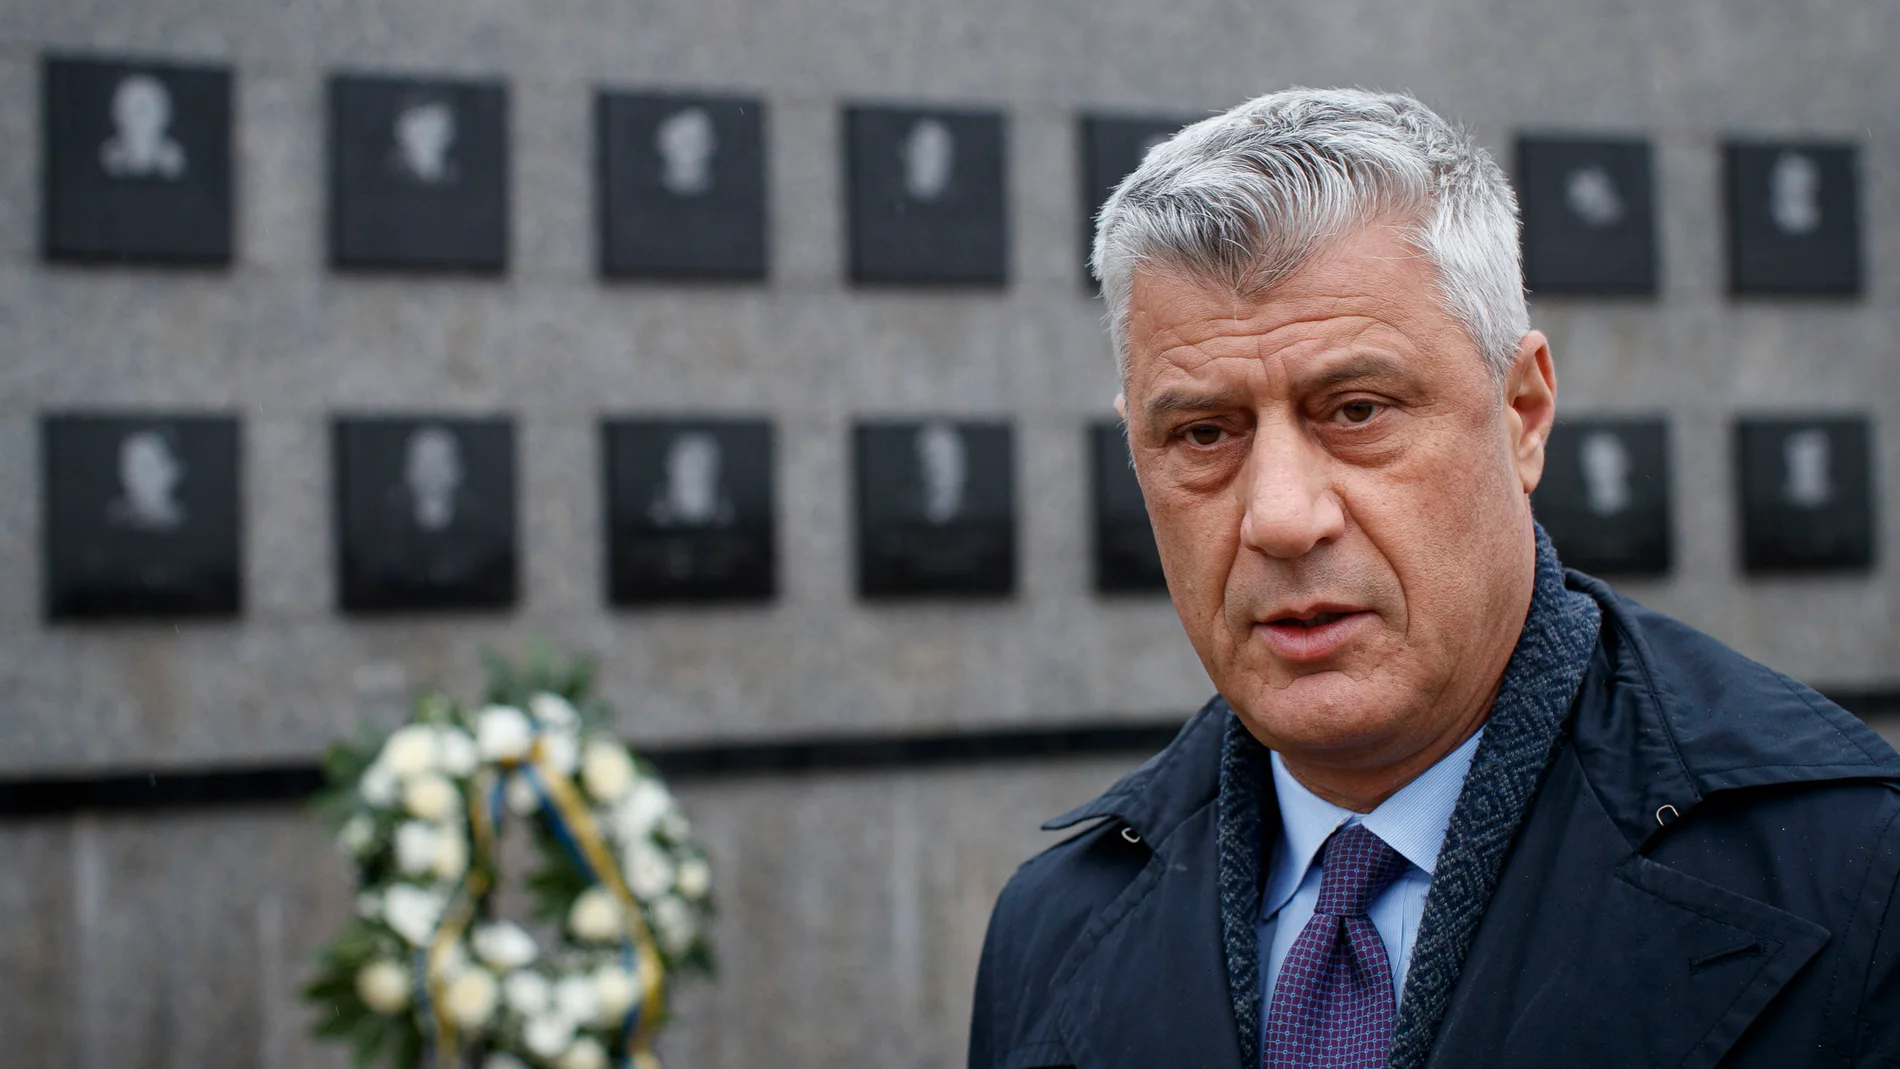 Specialist Prosecutor's Office files ten-count Indictment with the Kosovo Specialist Chambers charging Kosovo President Thaci, with crimes against humanity and war crimes